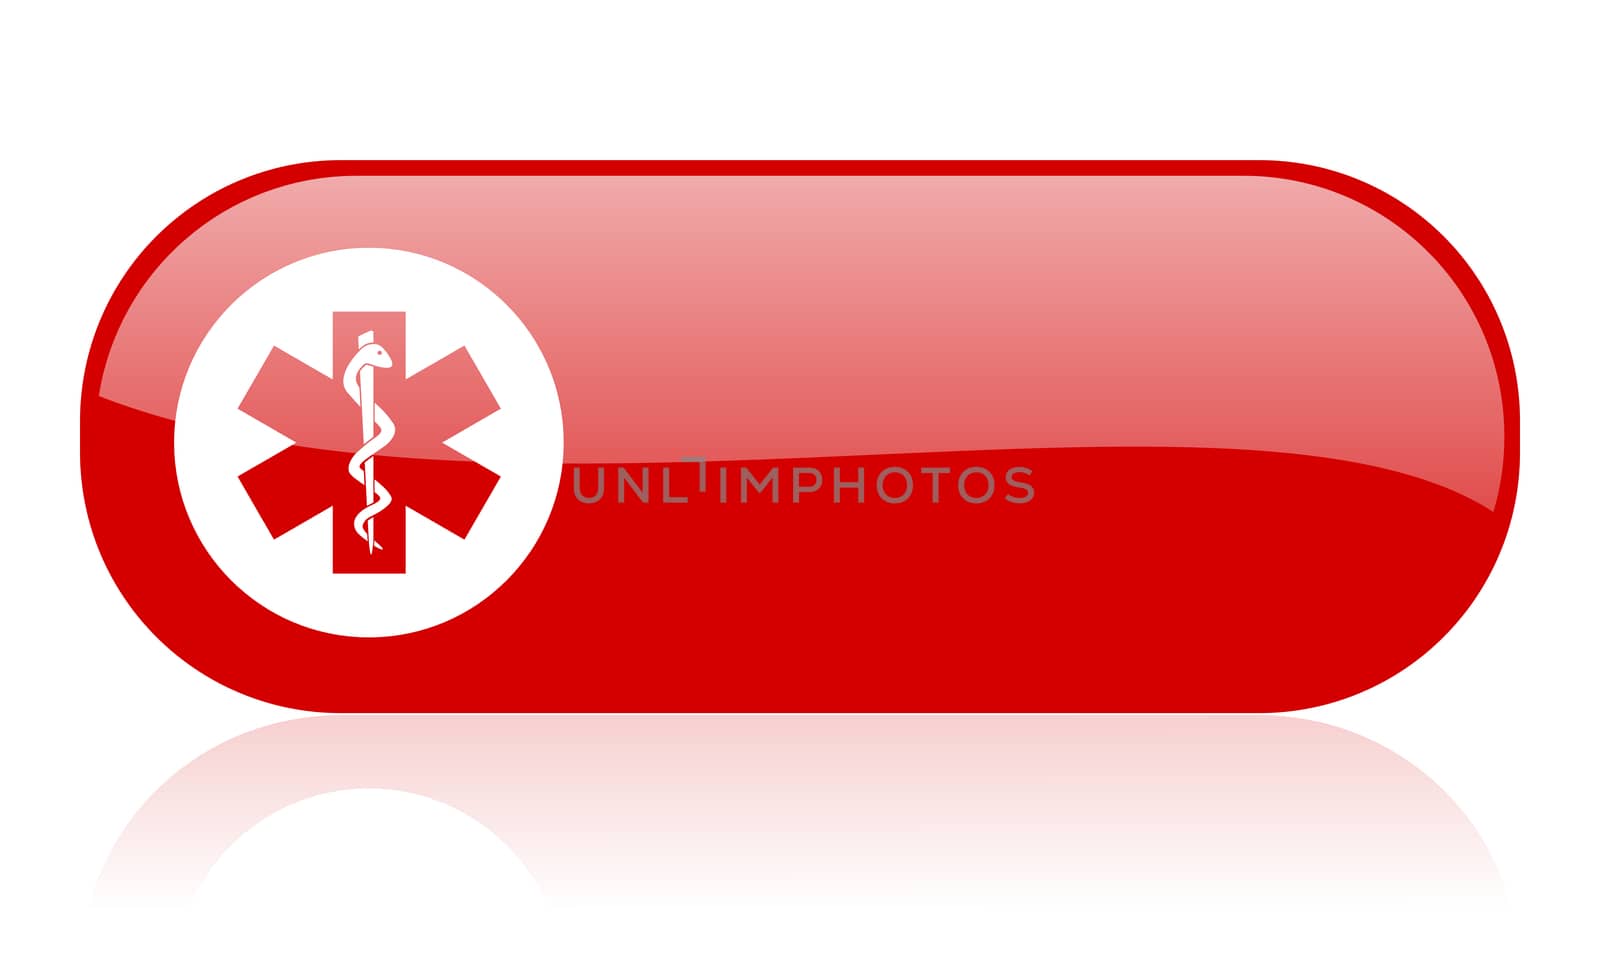 caduceus red web glossy icon